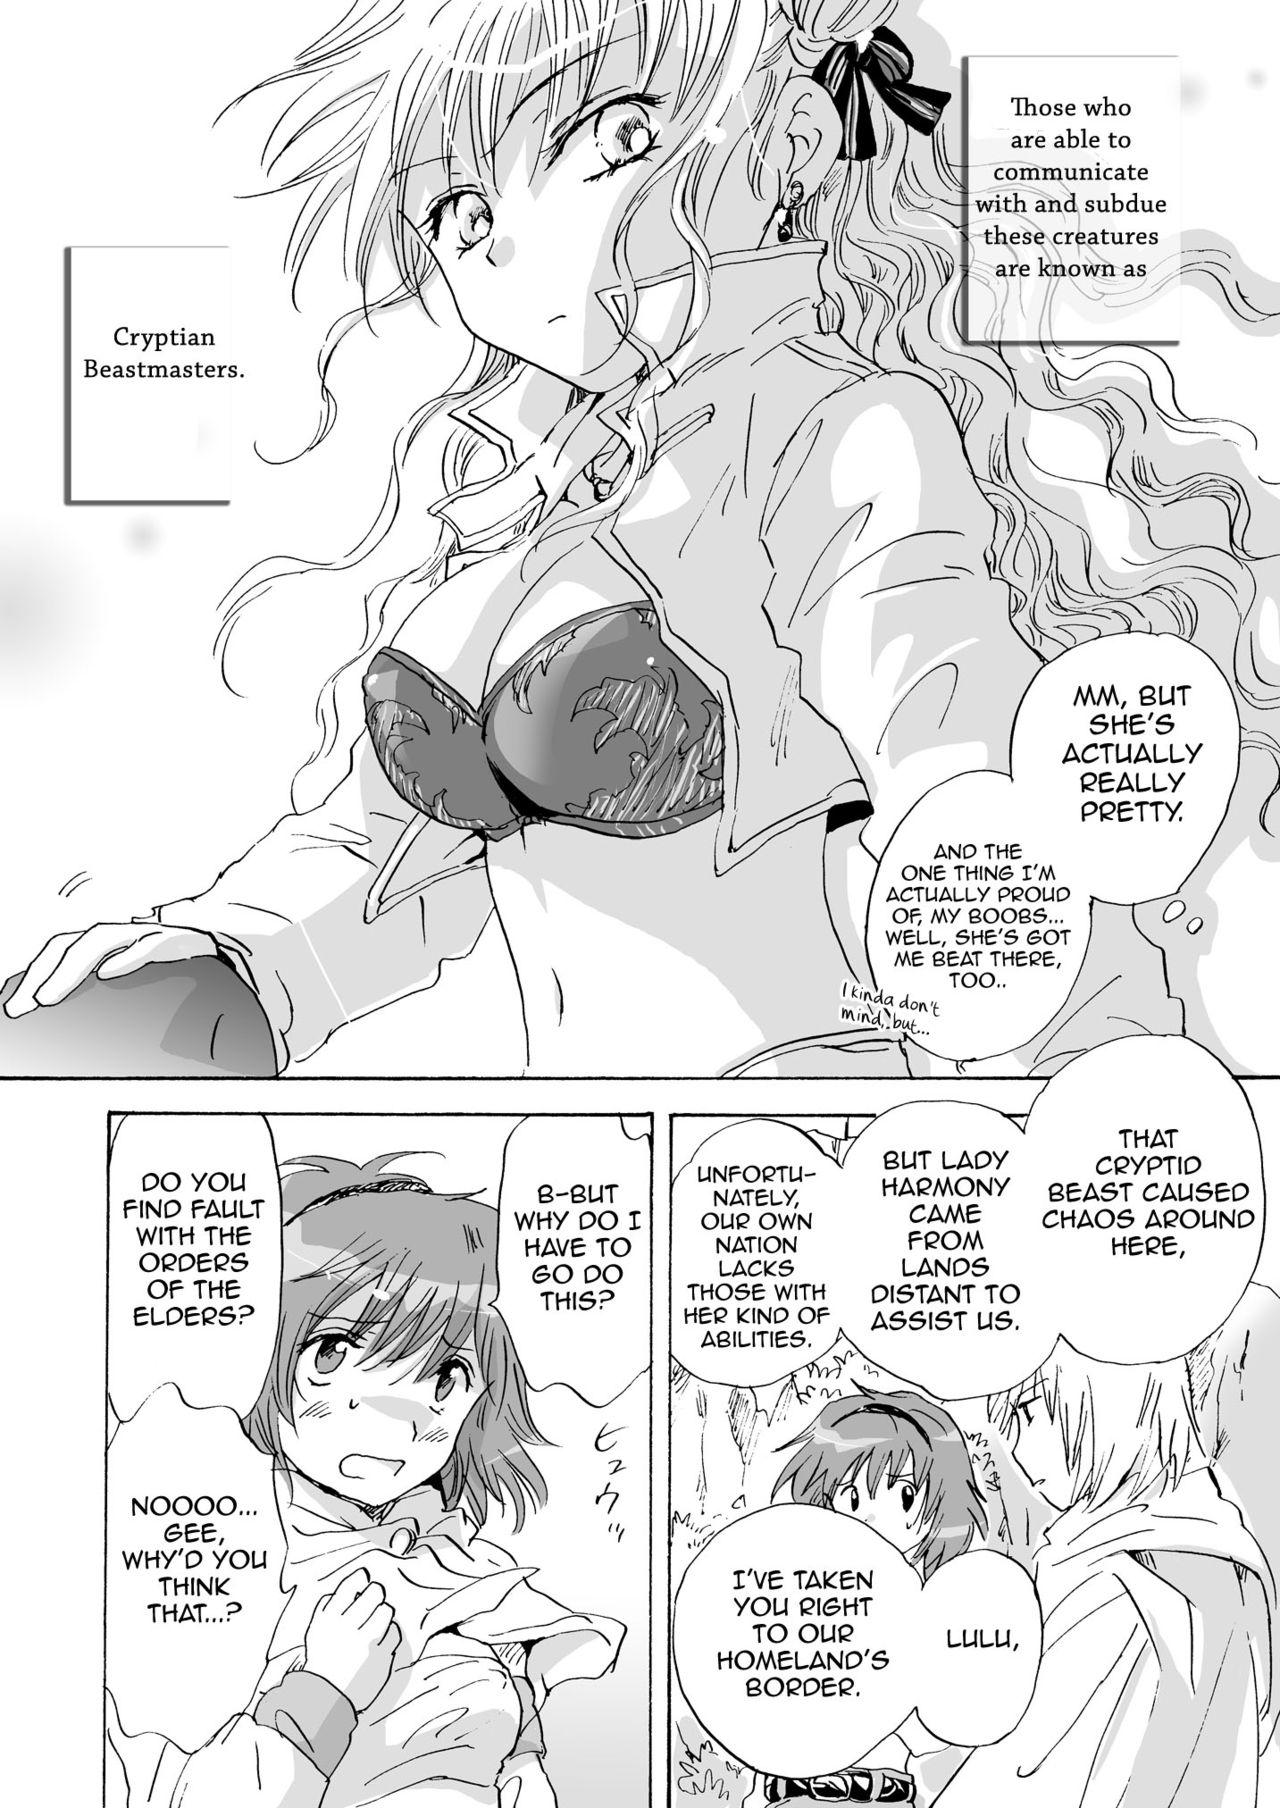 Sapphicerotica Cutie Beast Complete Edition Ch. 1-2 Jap - Page 7